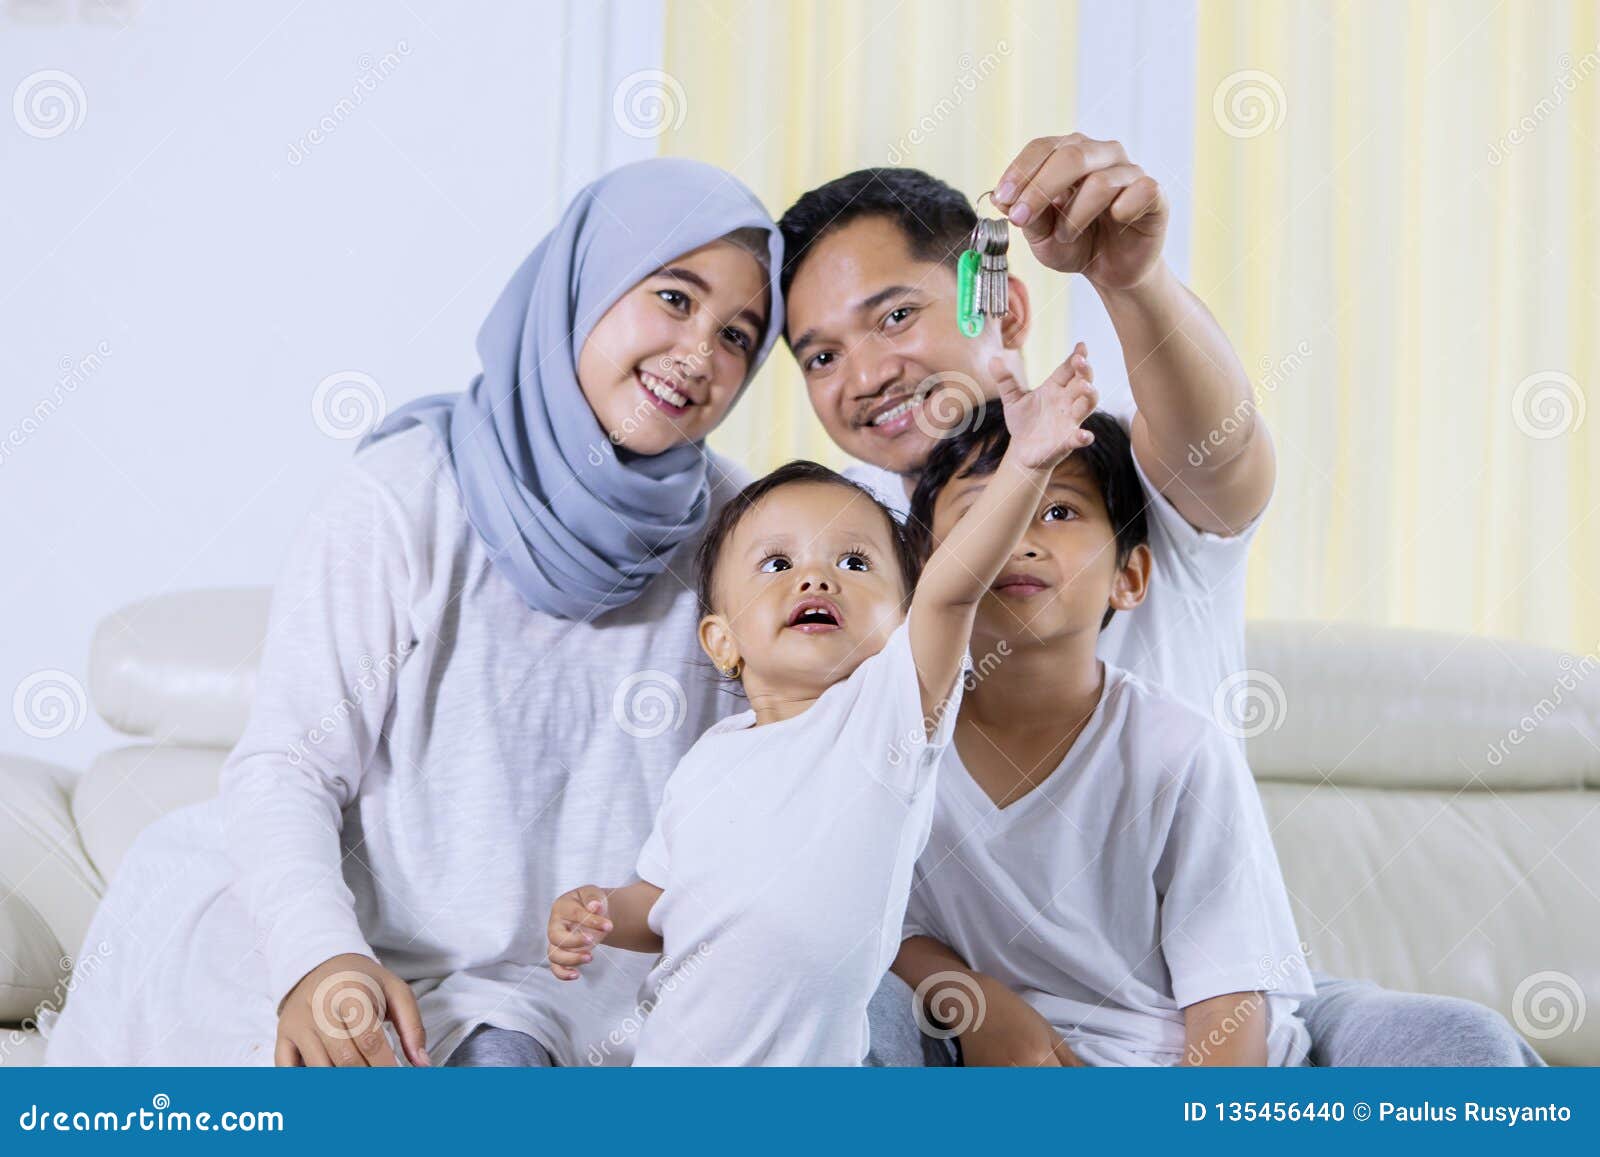 Muslim Family Holds Key To Their New Home Stock Photo - Image of living